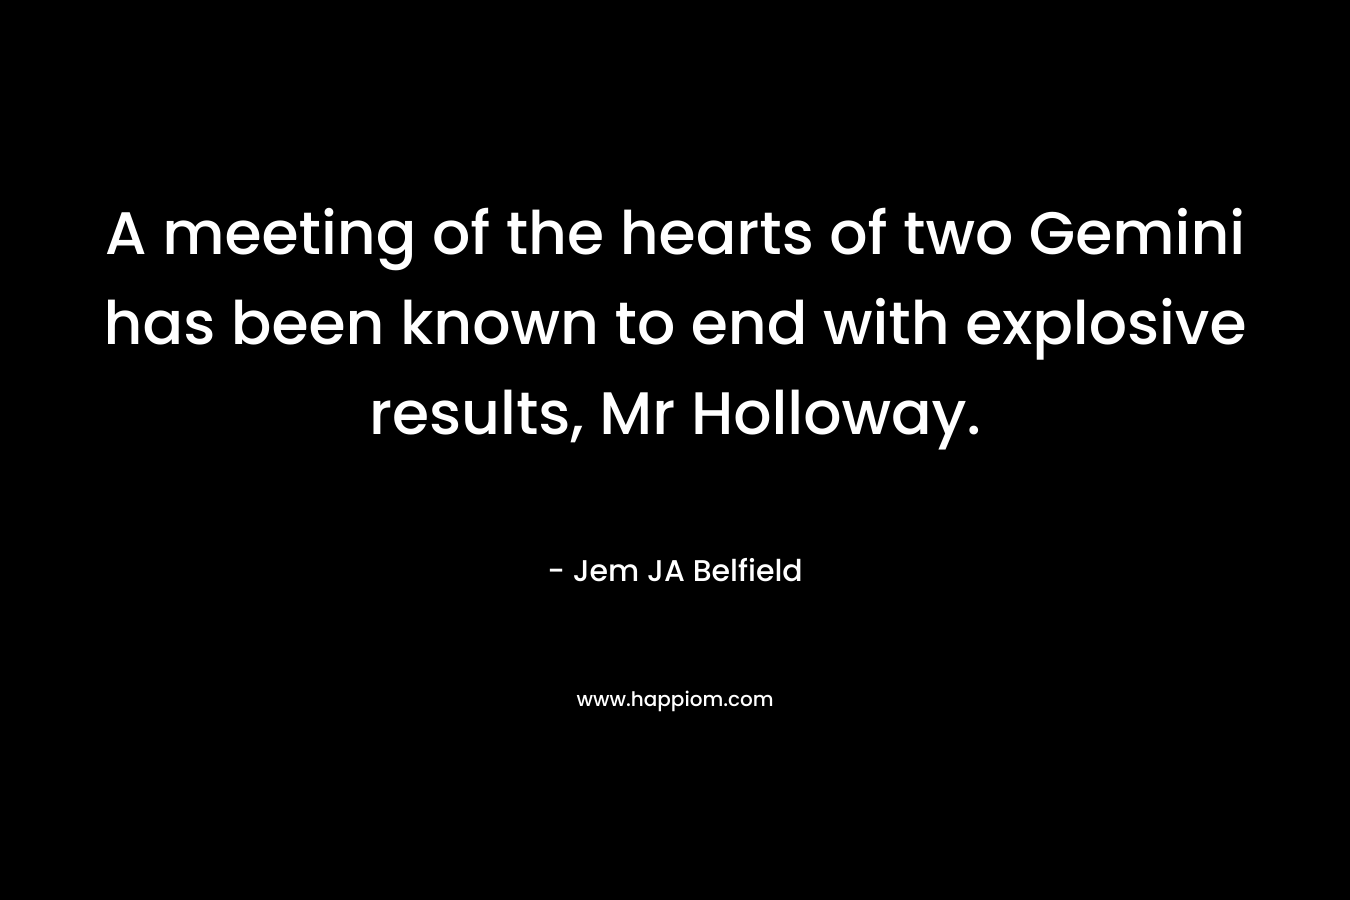 A meeting of the hearts of two Gemini has been known to end with explosive results, Mr Holloway.